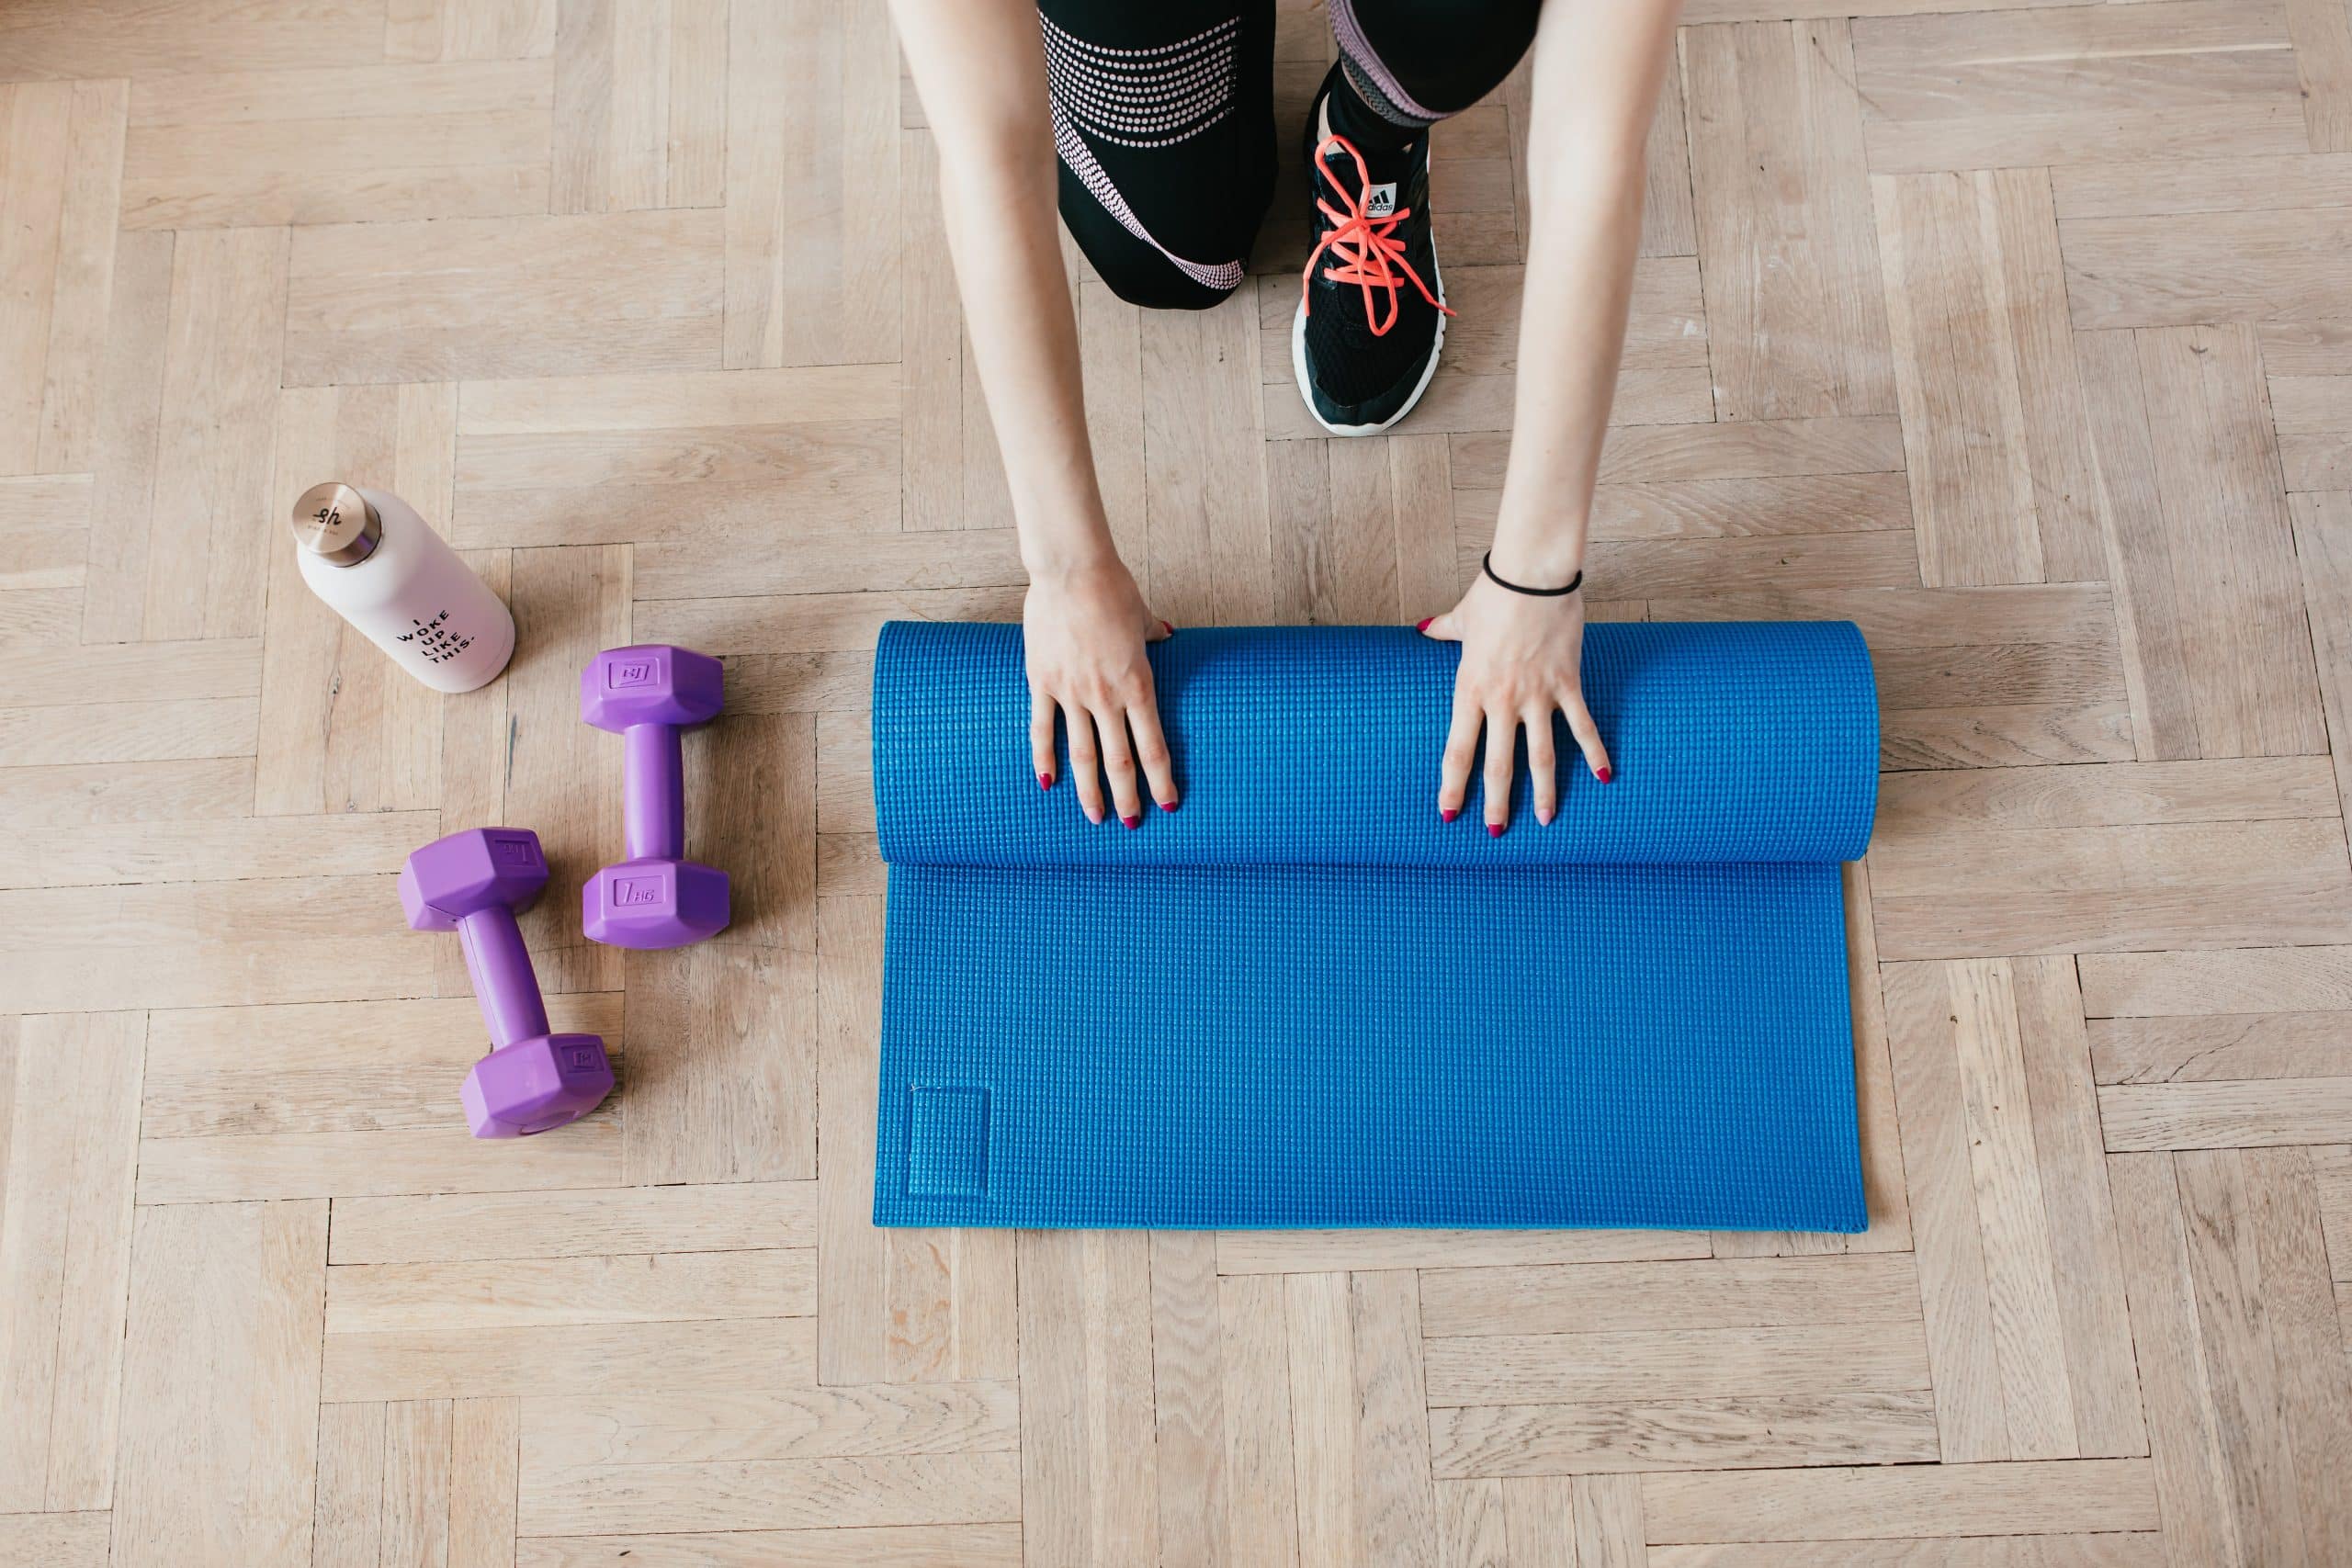 A pair of purple dumbbells next to a blue yoga mat being rolled up